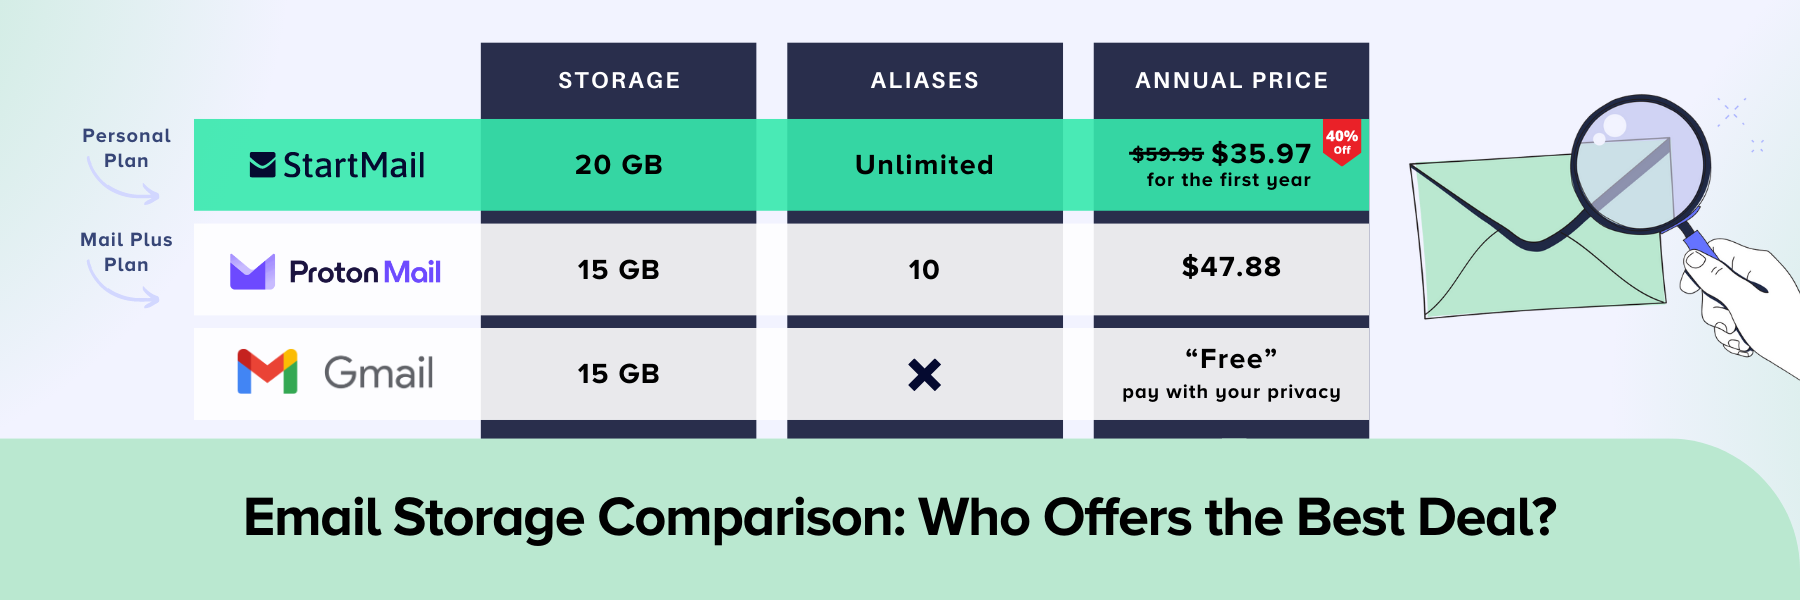 Comparison chart to highlight who offers the best deal when it comes to Storage, Aliases and Annual Price. The comparison is between StartMail, ProtonMail and Gmail. StartMail offers the most storage: 20GB. Gmail and Proton both offer 15GB. StartMail offers unlimited aliases. Proton offers 10, and Gmail offer no aliases. StartMail's annual price for a personal plan, is $35.97 for the first year, with a 40% discount. Proton's Mail Plus Plan is $47.88, and Gmail is "Free", but you pay with your privacy.